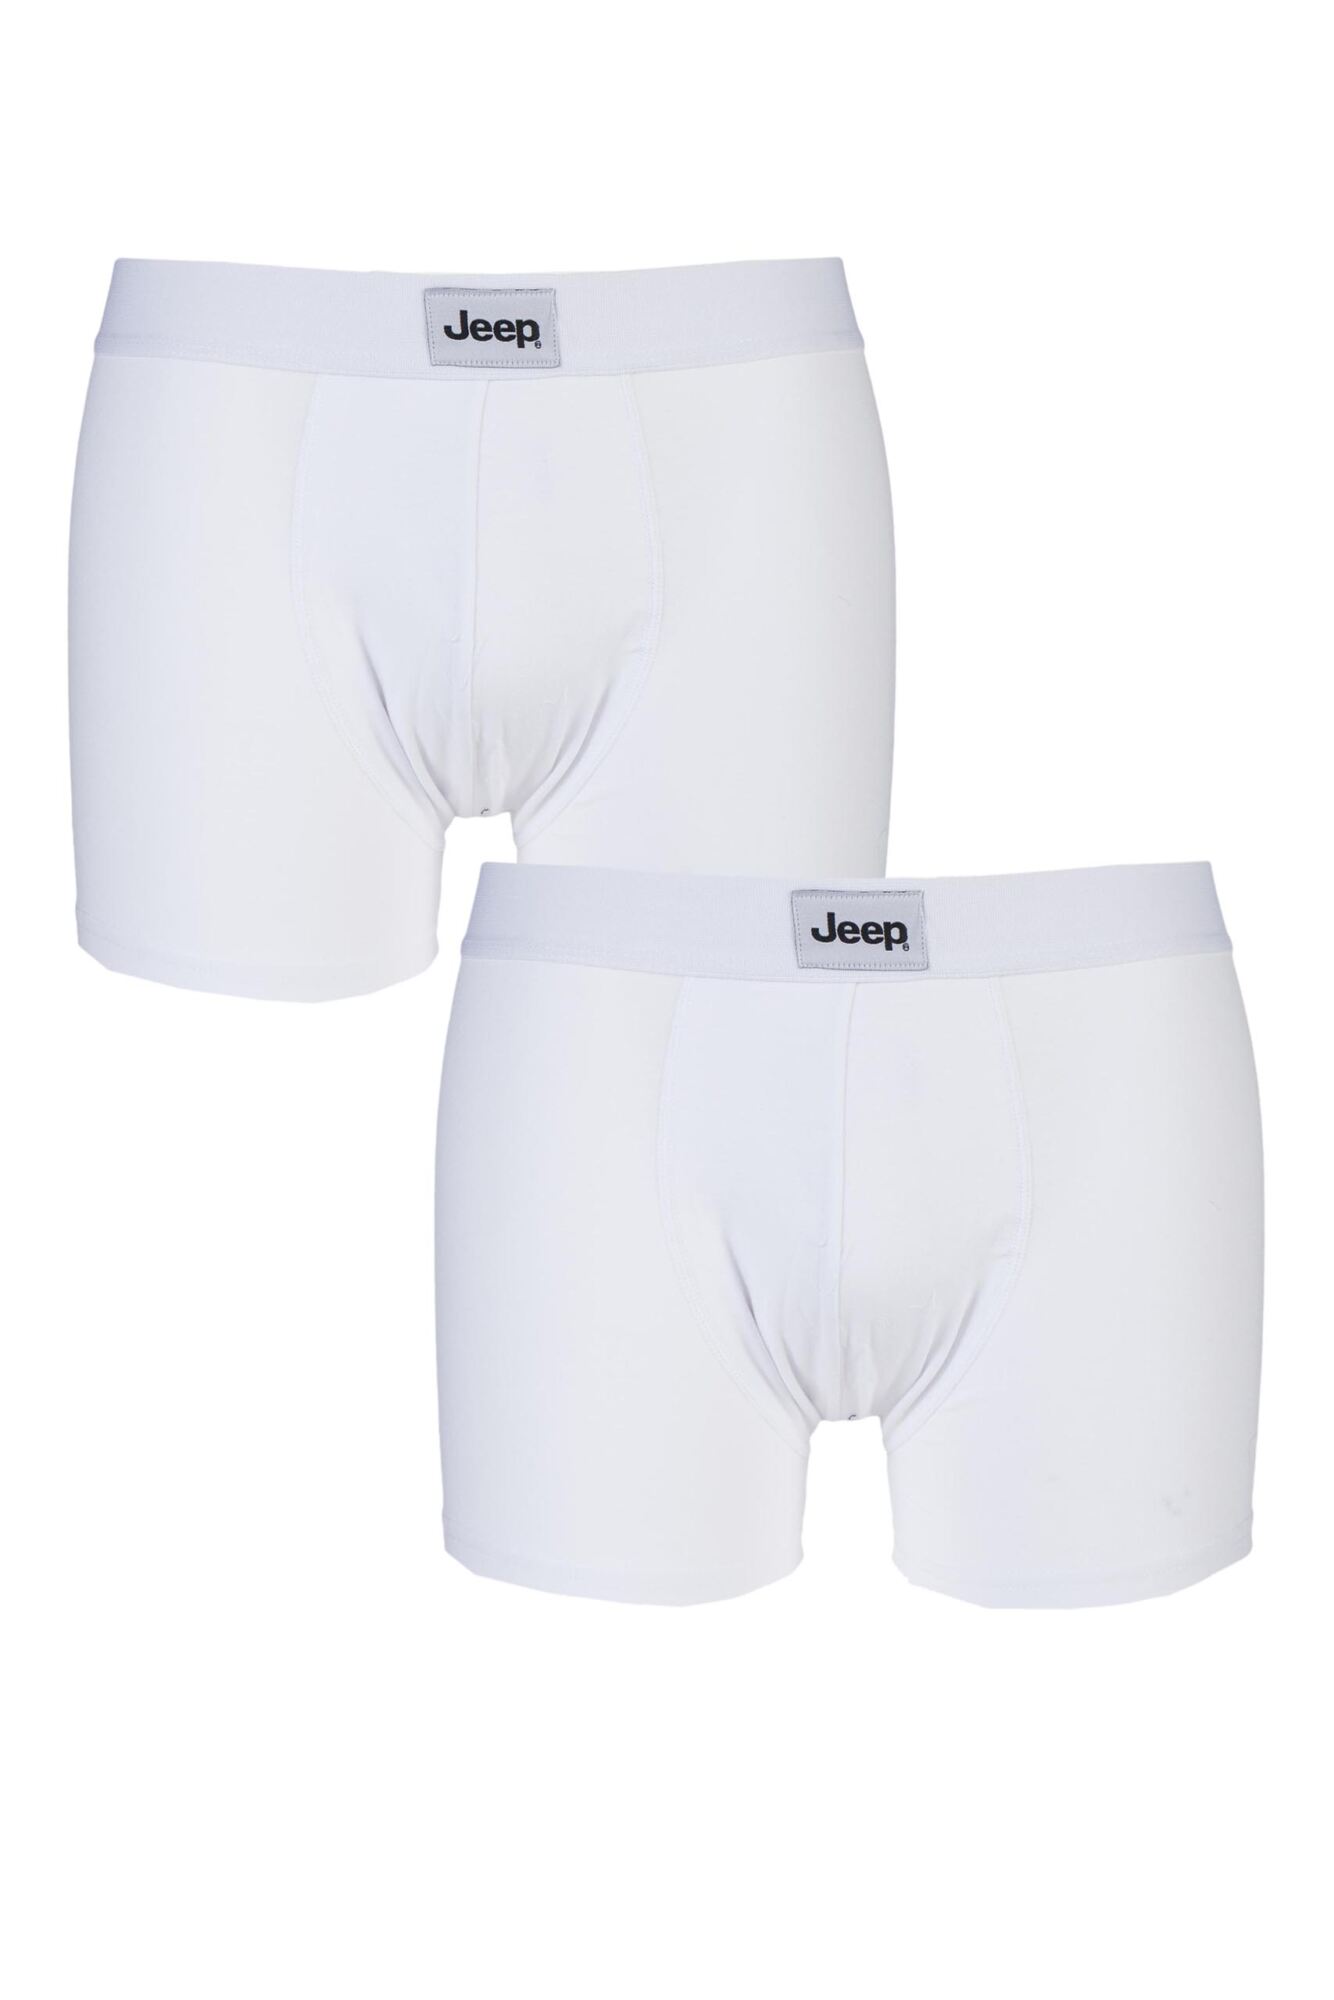 Jeep Cotton Plain Fitted Hipster Trunks